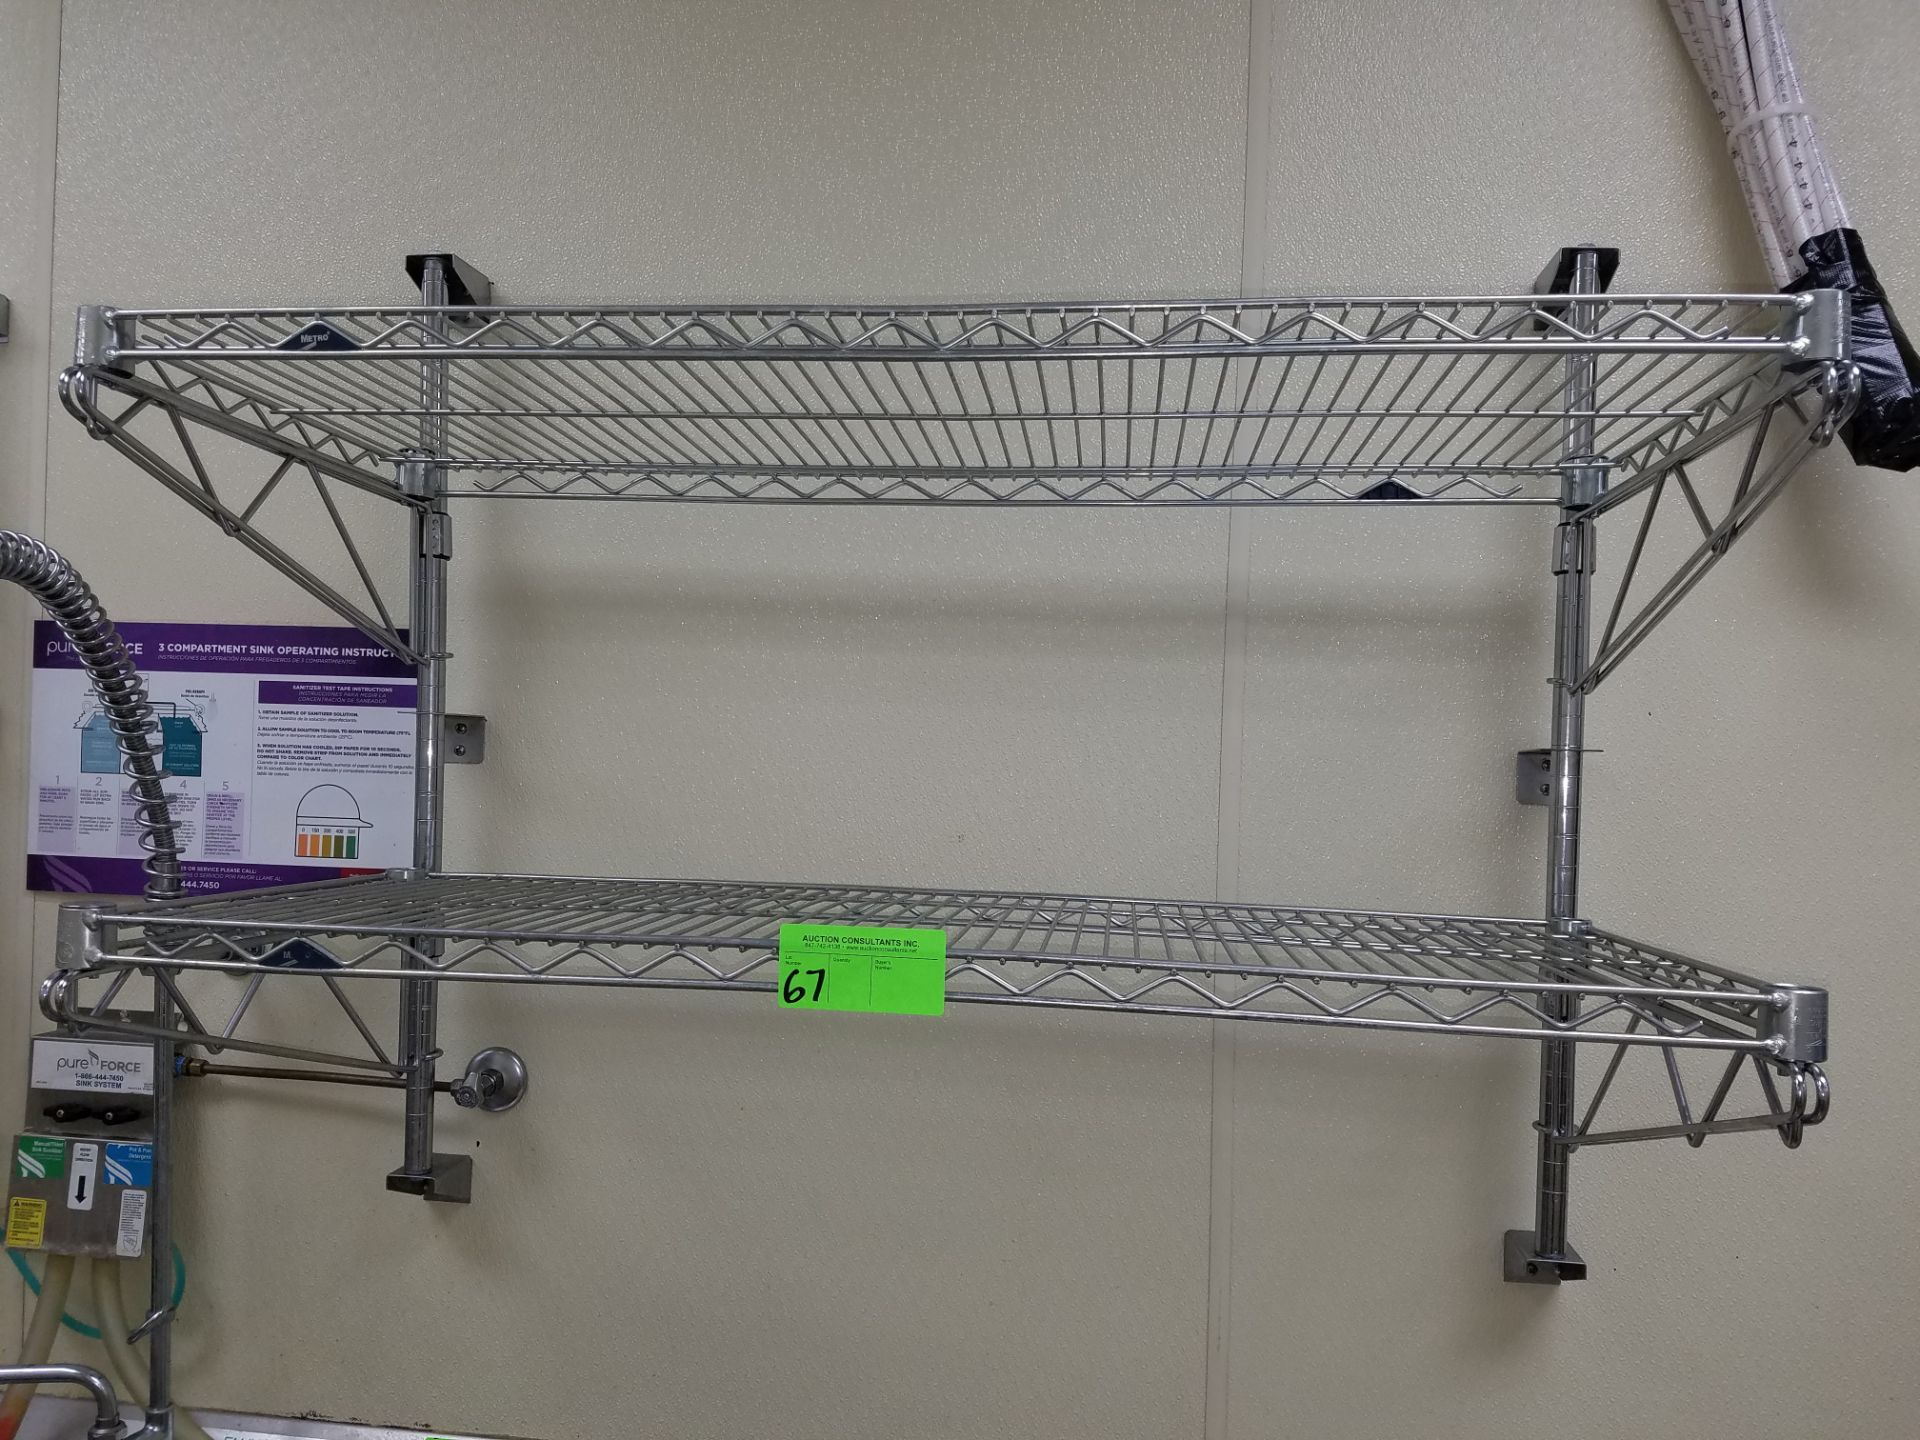 Metro stainless steel double over shelf with brackets, 42"